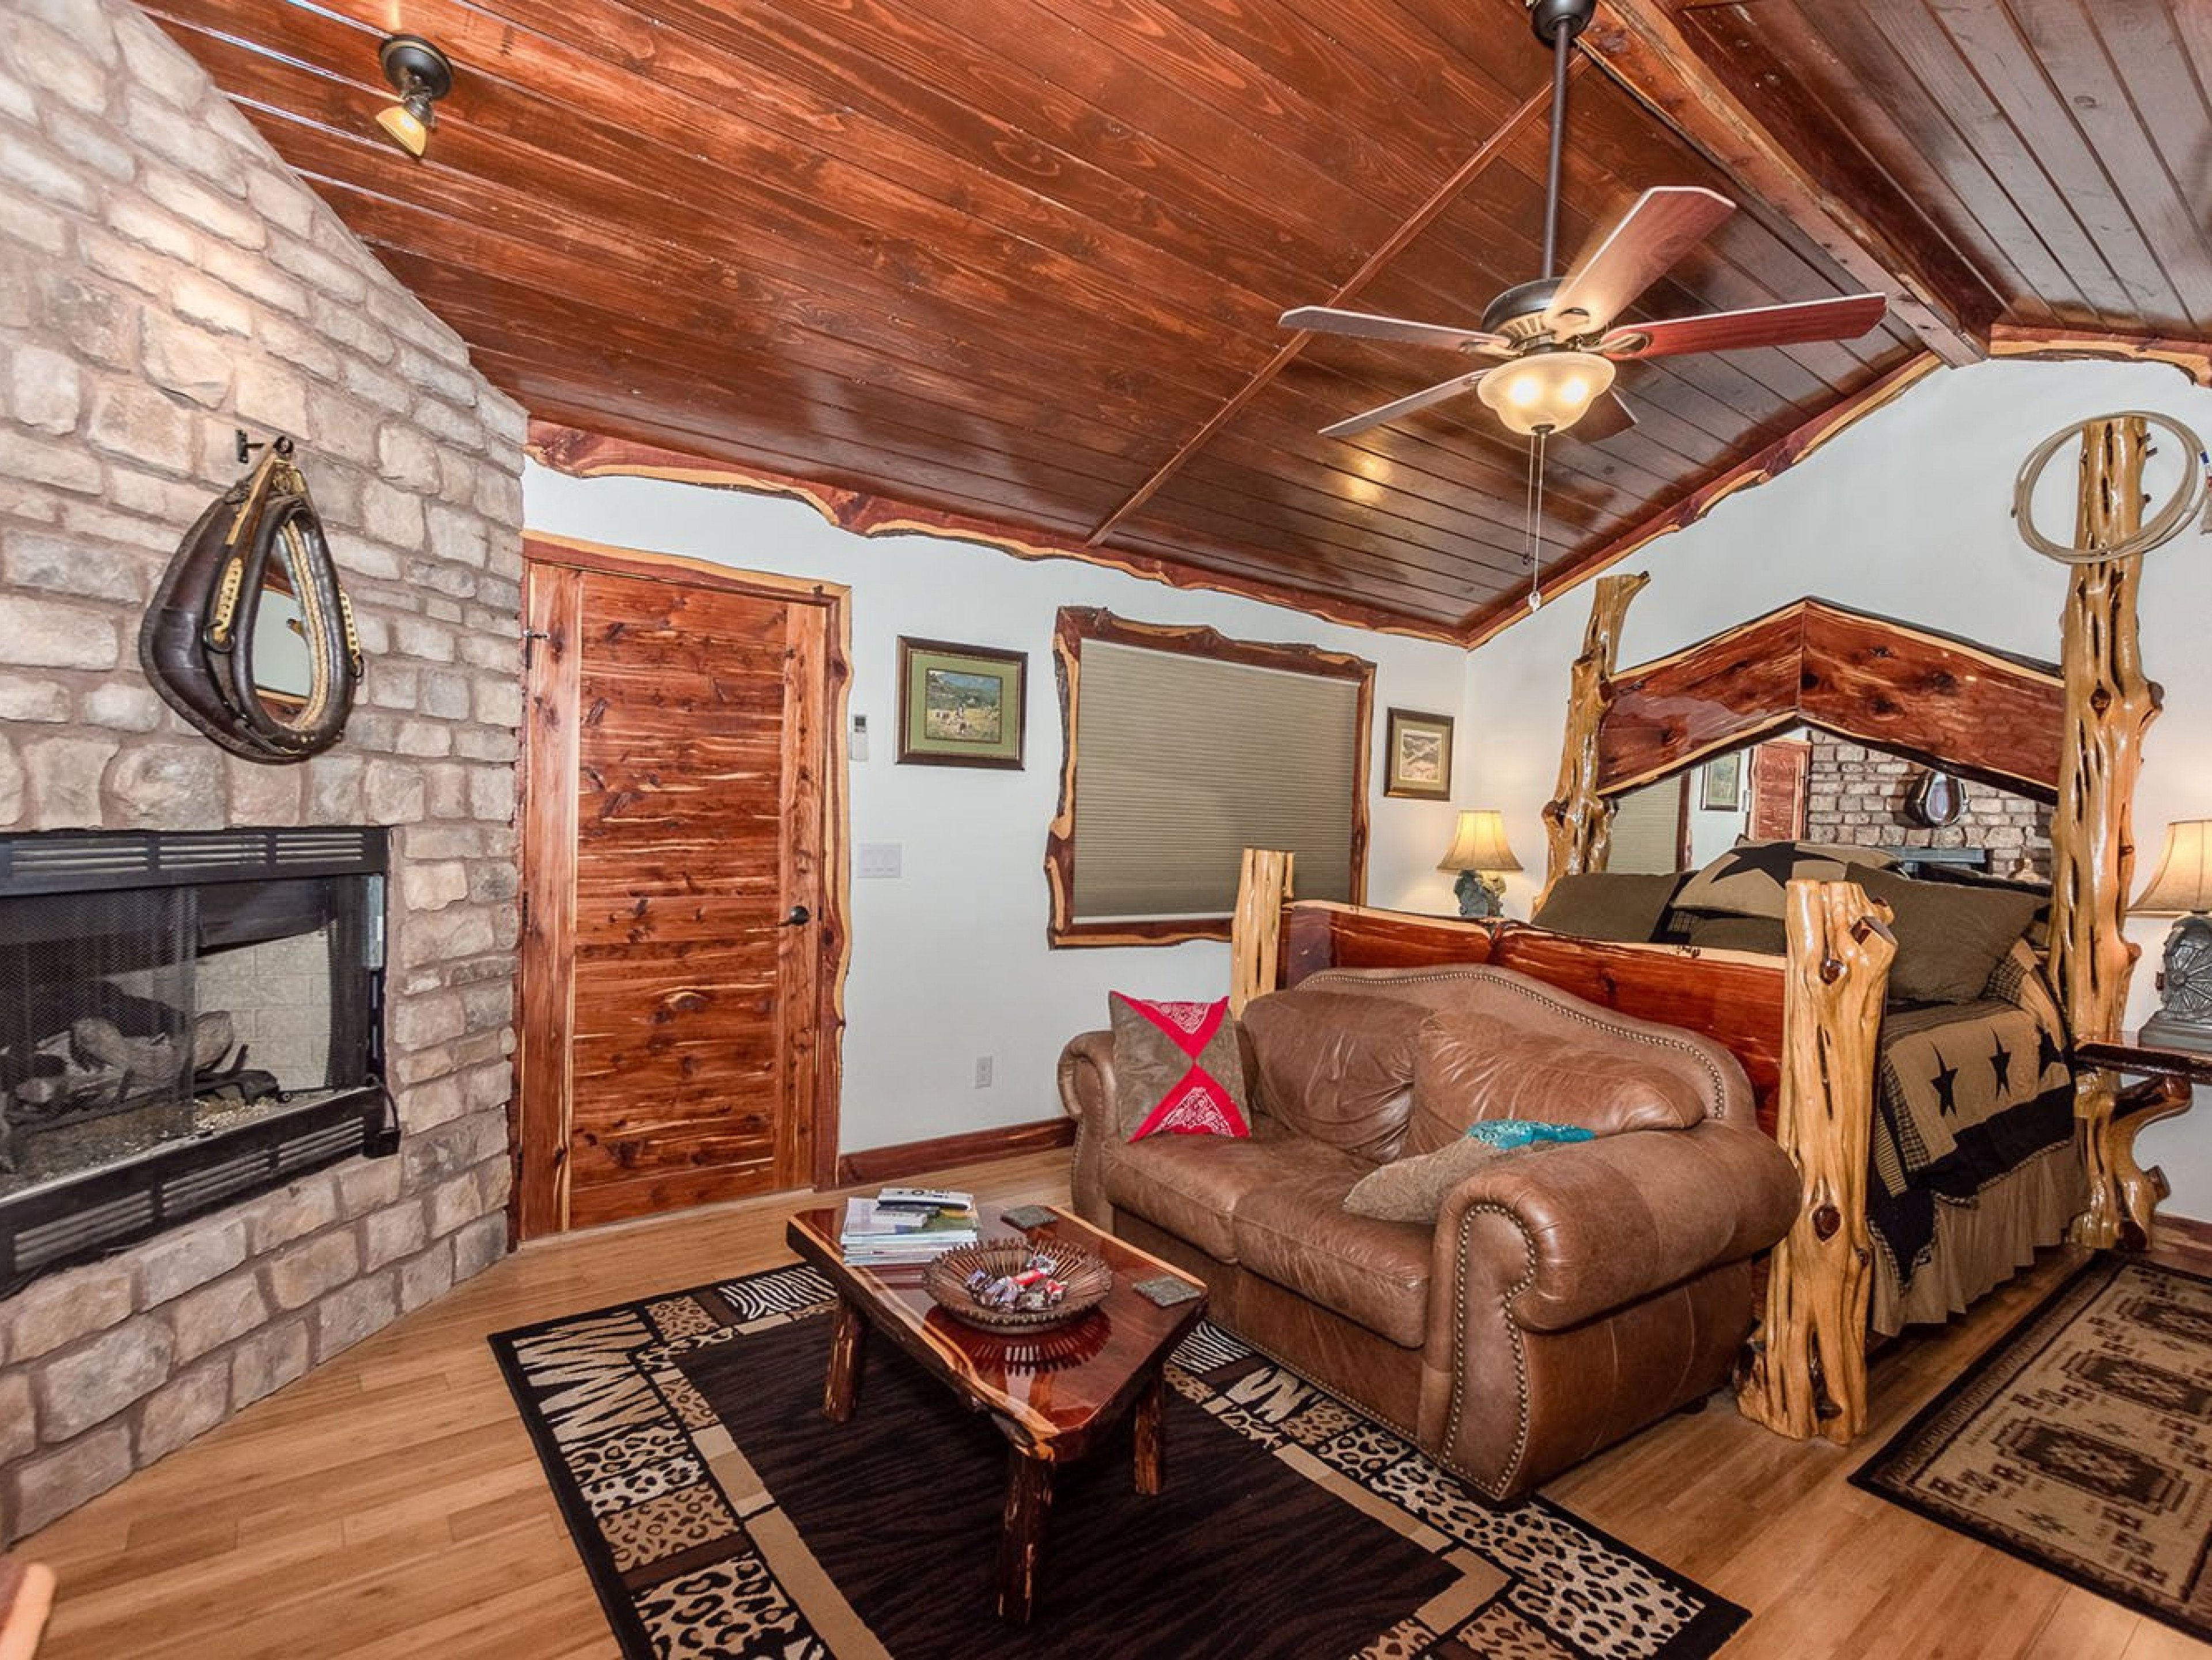 Fredericksburg 36 Pet friendly log cabins with hot tubs